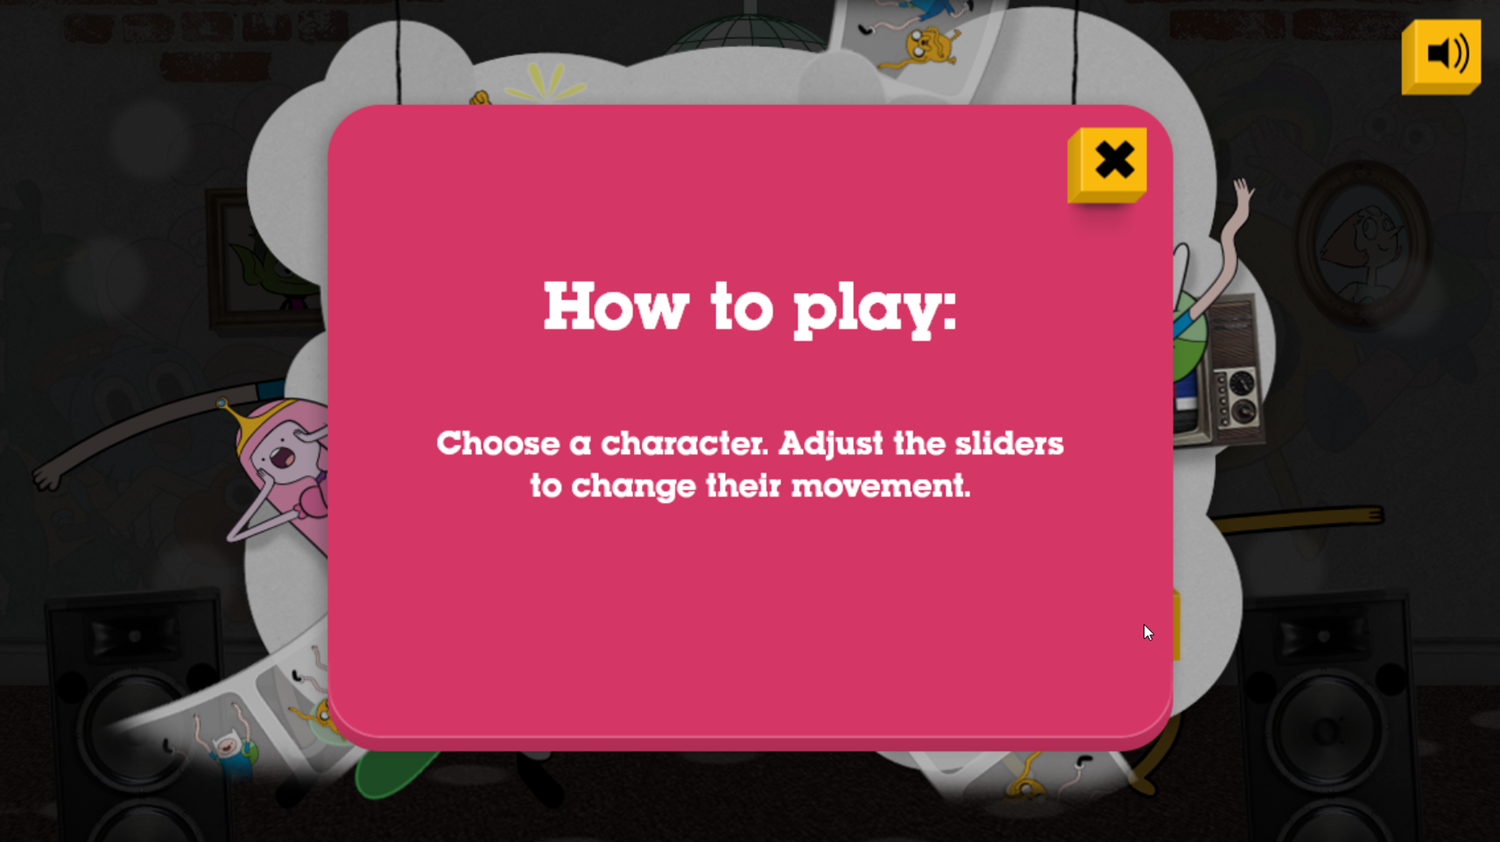 Adventure Time Animation Game How To Play Screenshot.